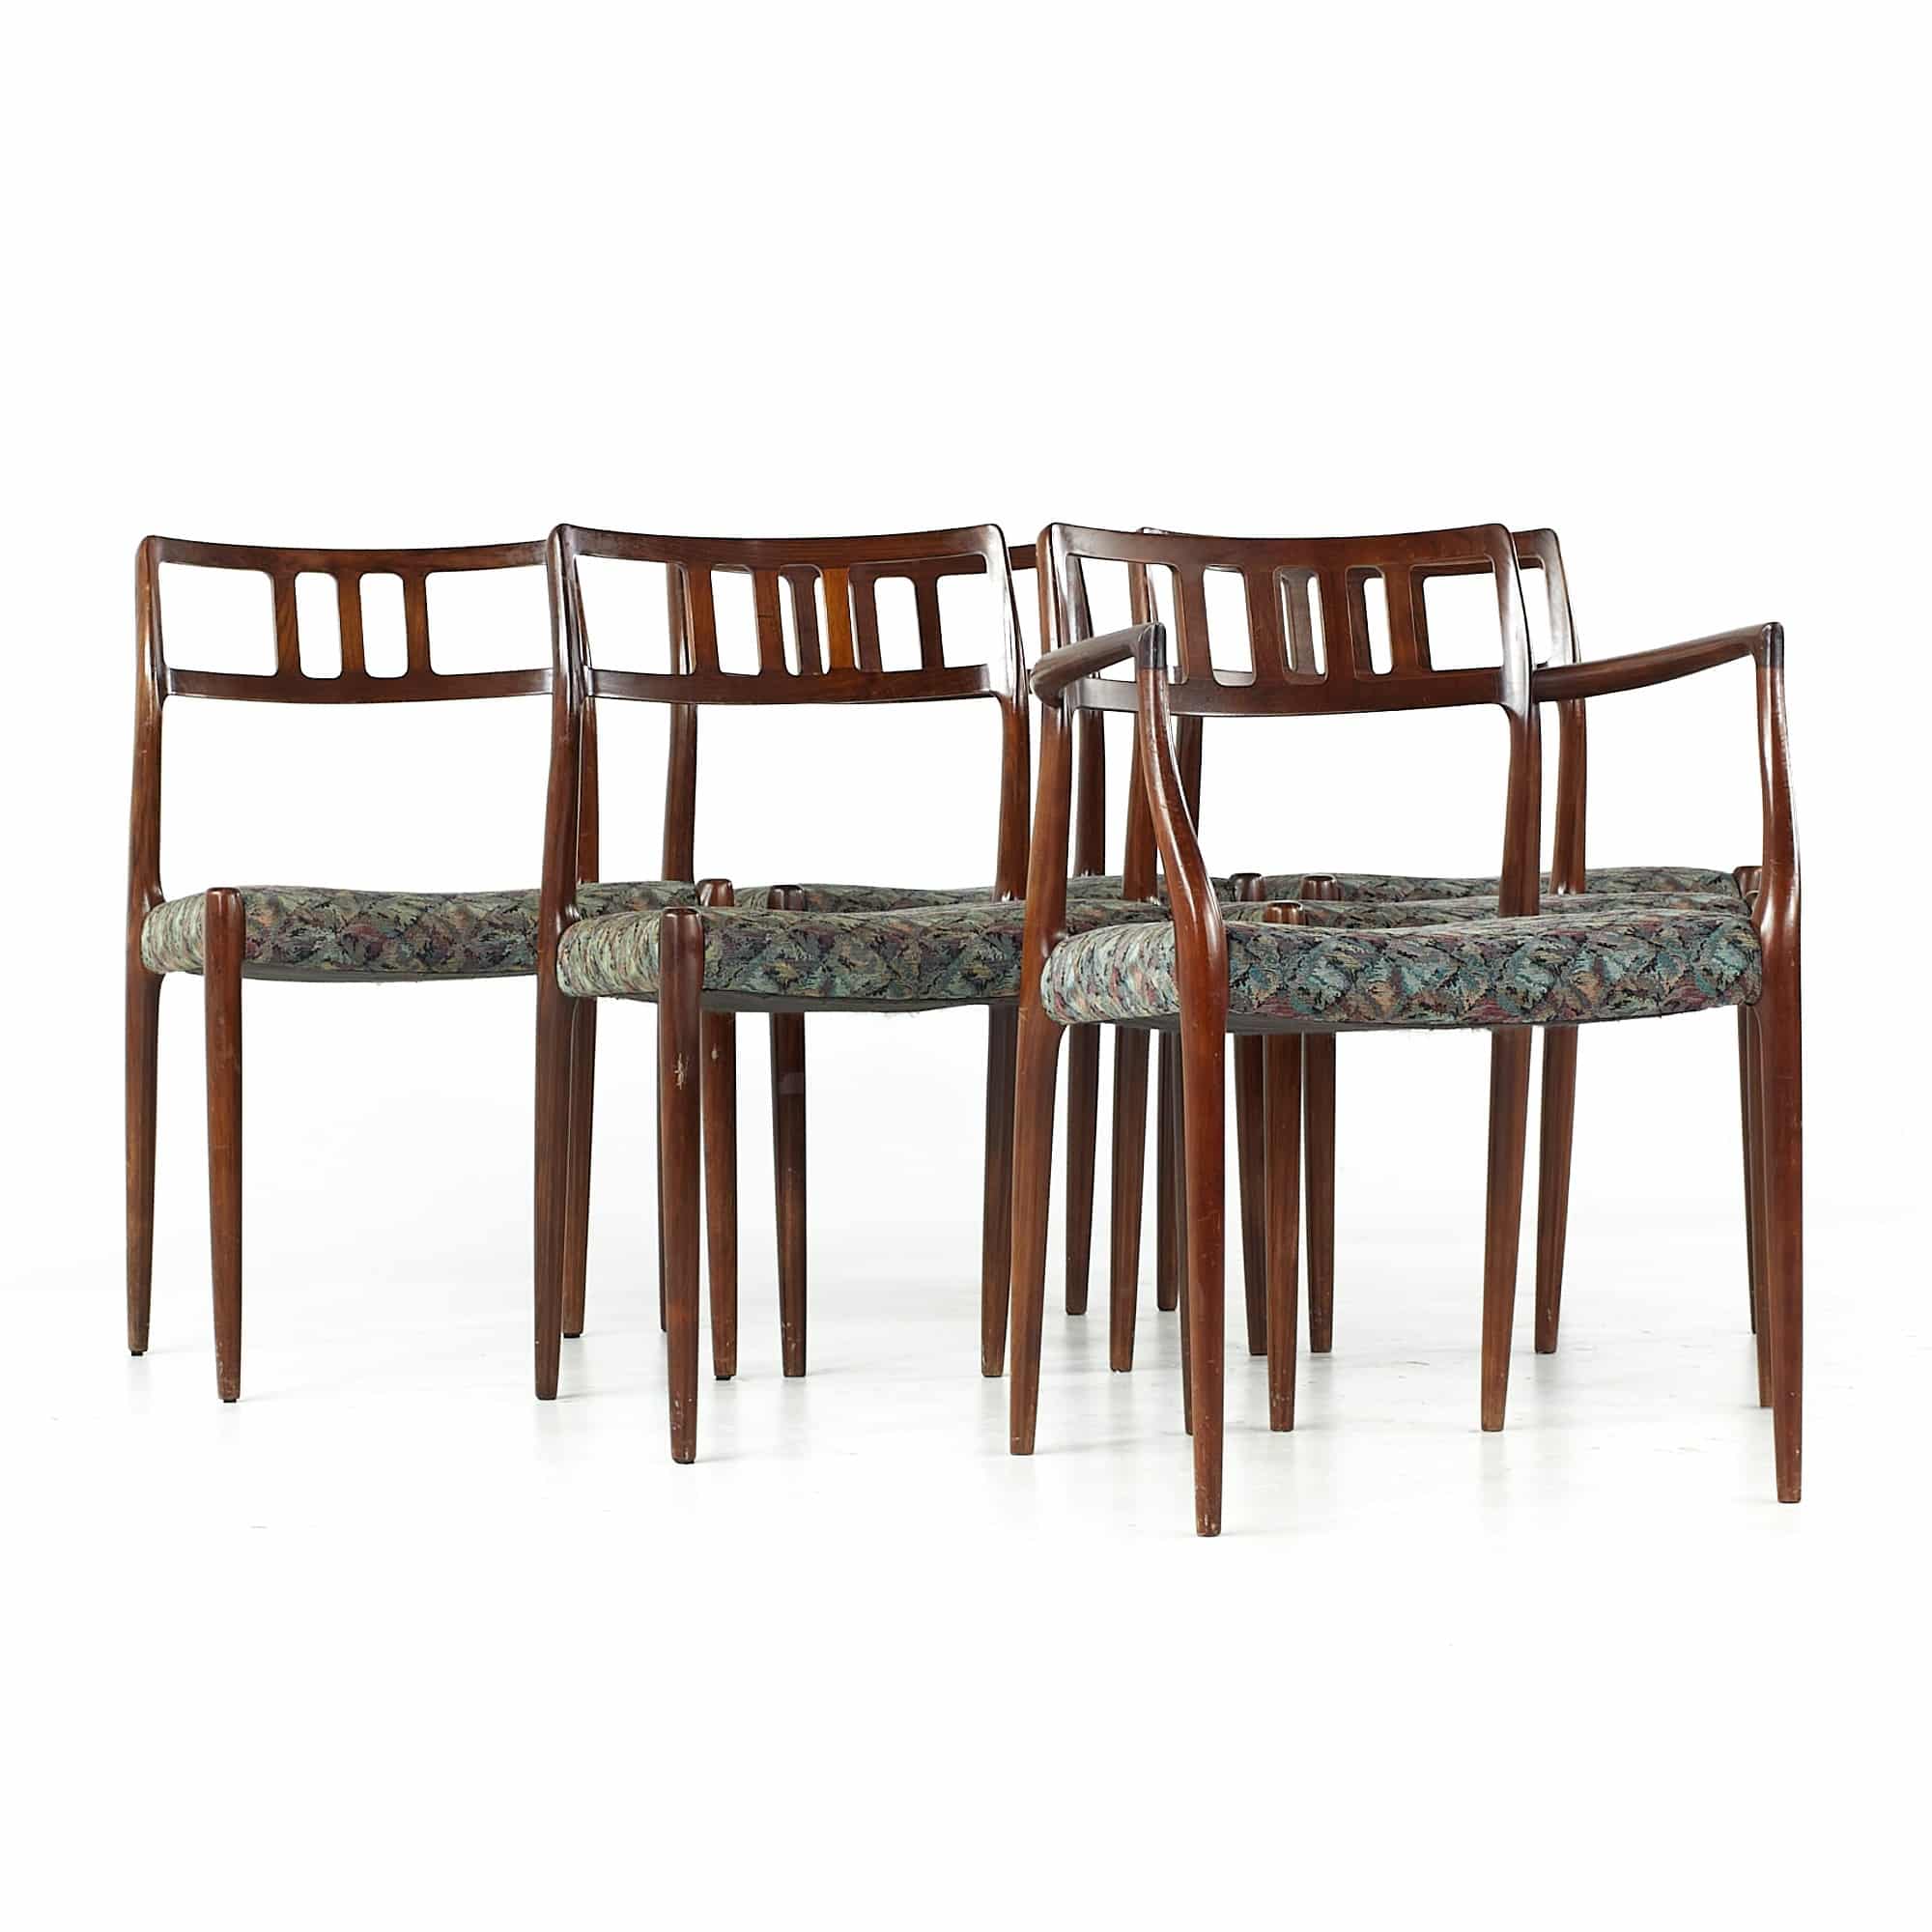 Niels Moller Mid Century Model 79 Rosewood Dining Chairs - Set of 6